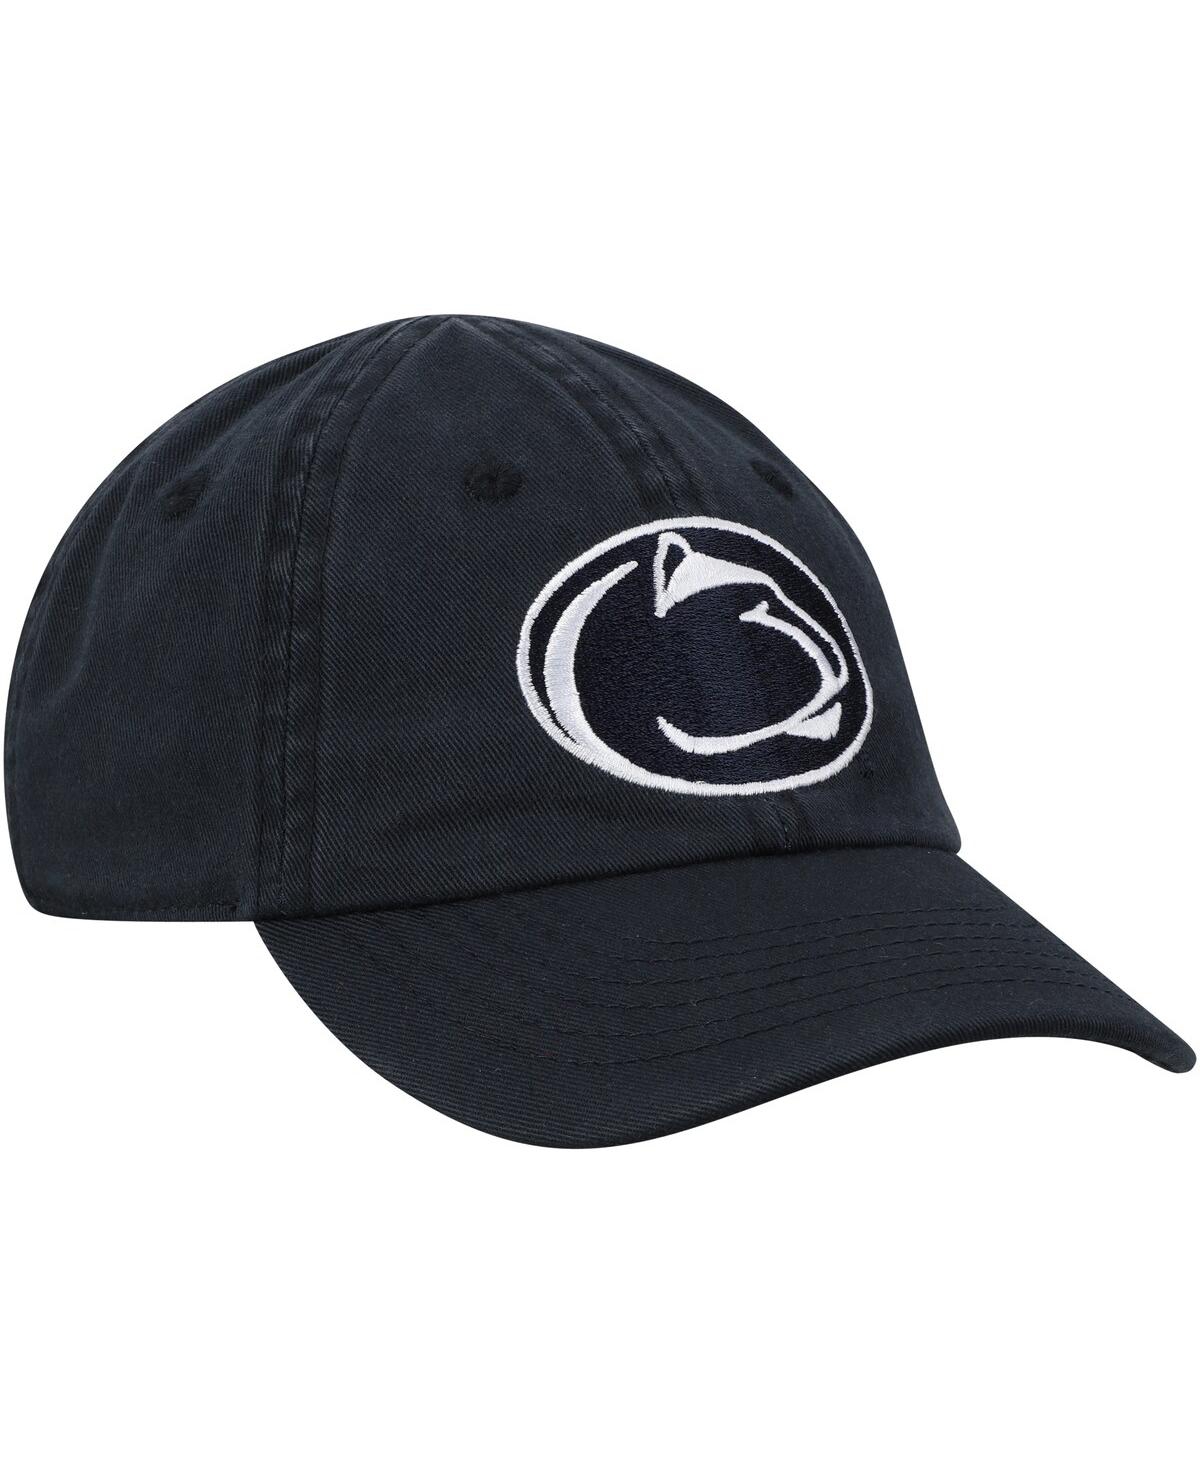 Shop Top Of The World Infant Unisex  Navy Penn State Nittany Lions Mini Me Adjustable Hat